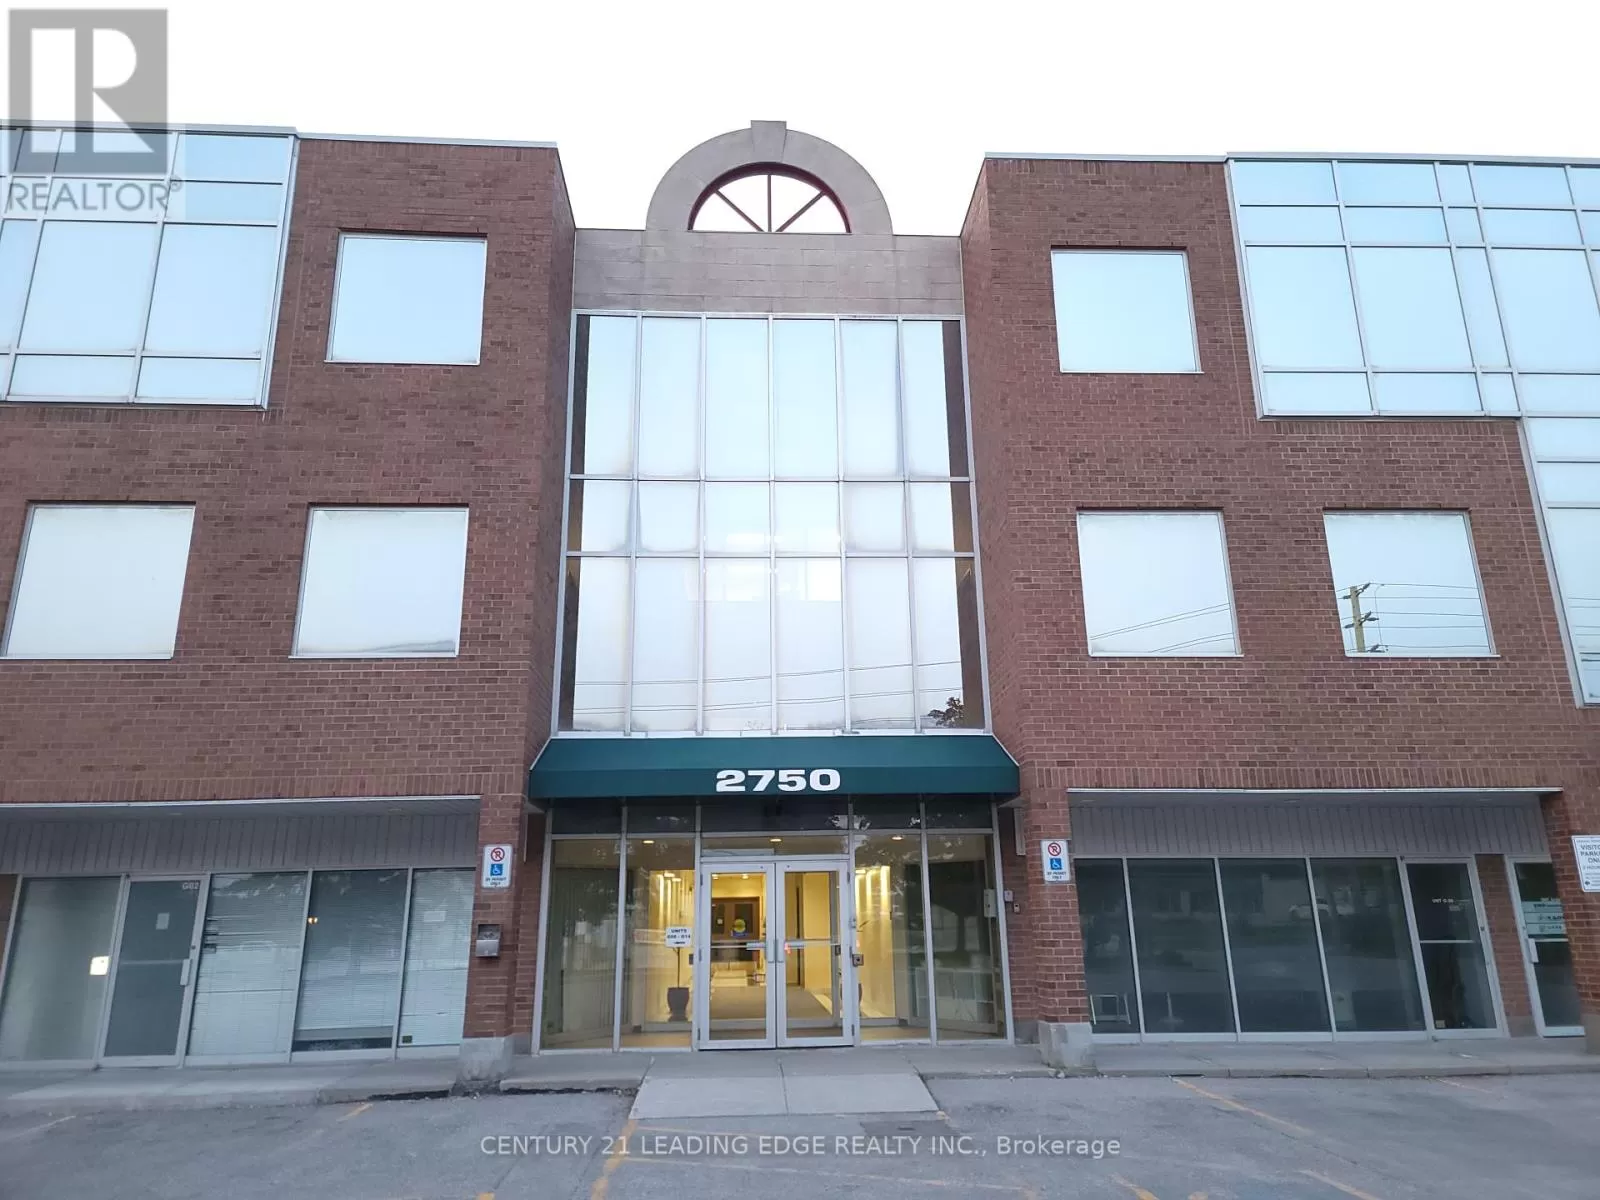 Retail for rent: #g6 -2750 14th Ave, Markham, Ontario L3R 0B6